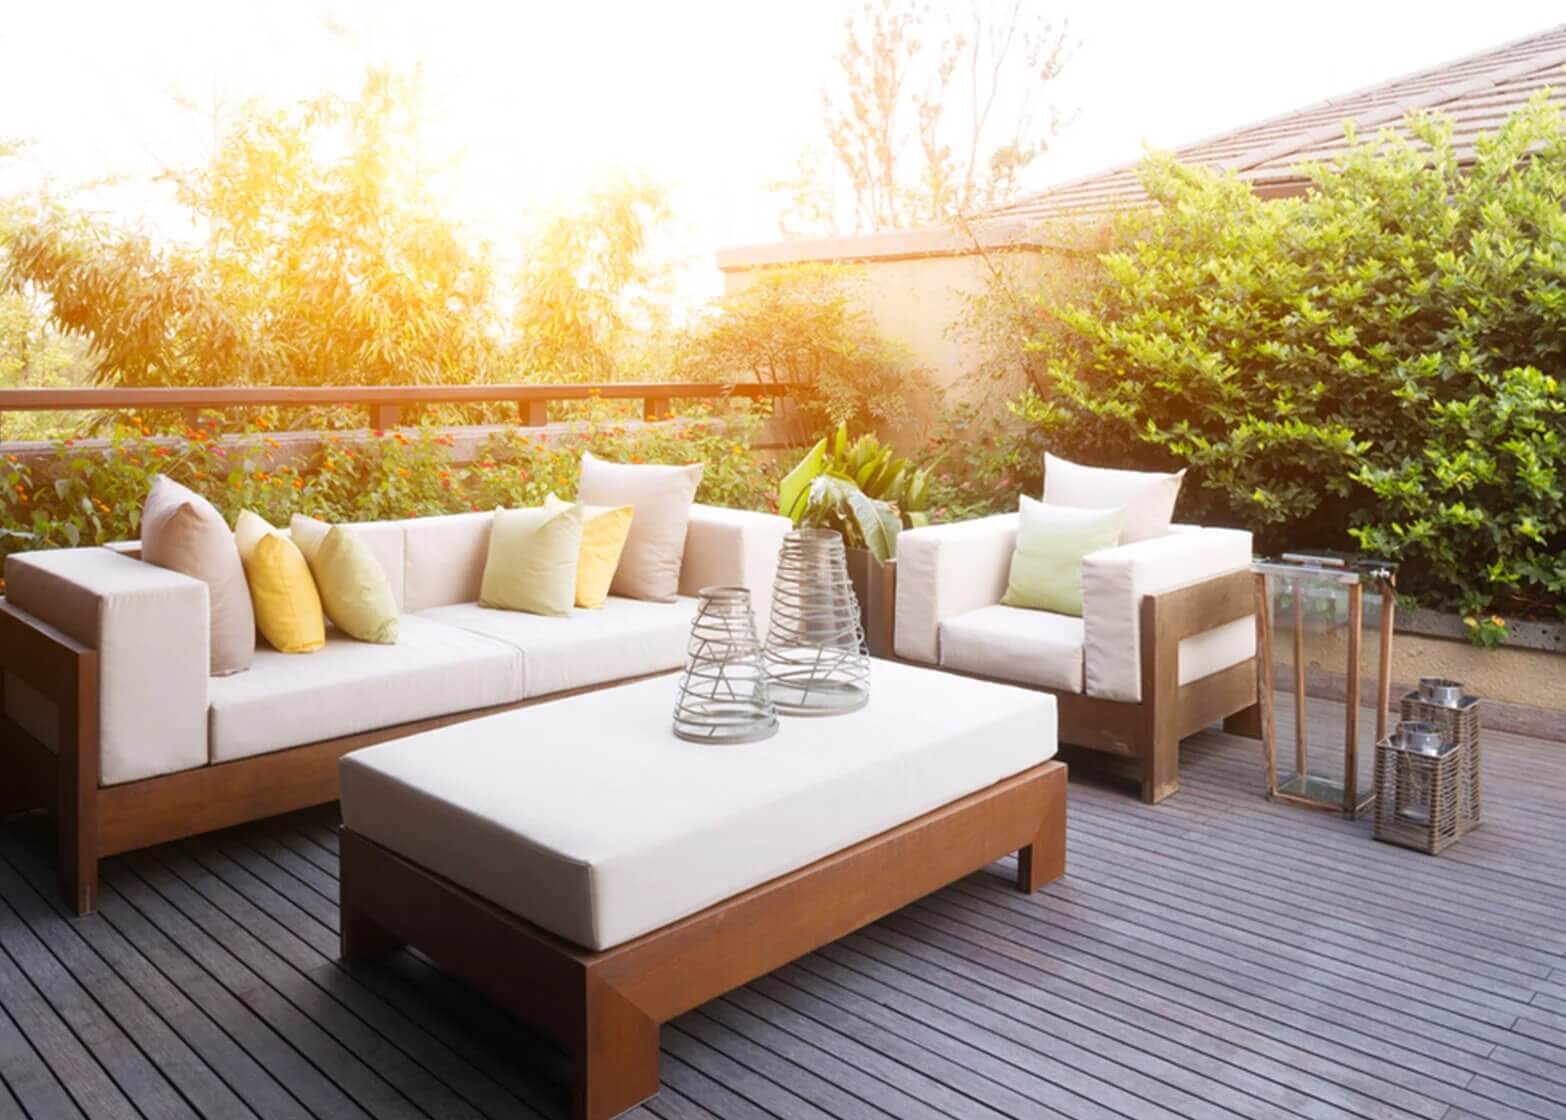 Soft outdoor seating on decking